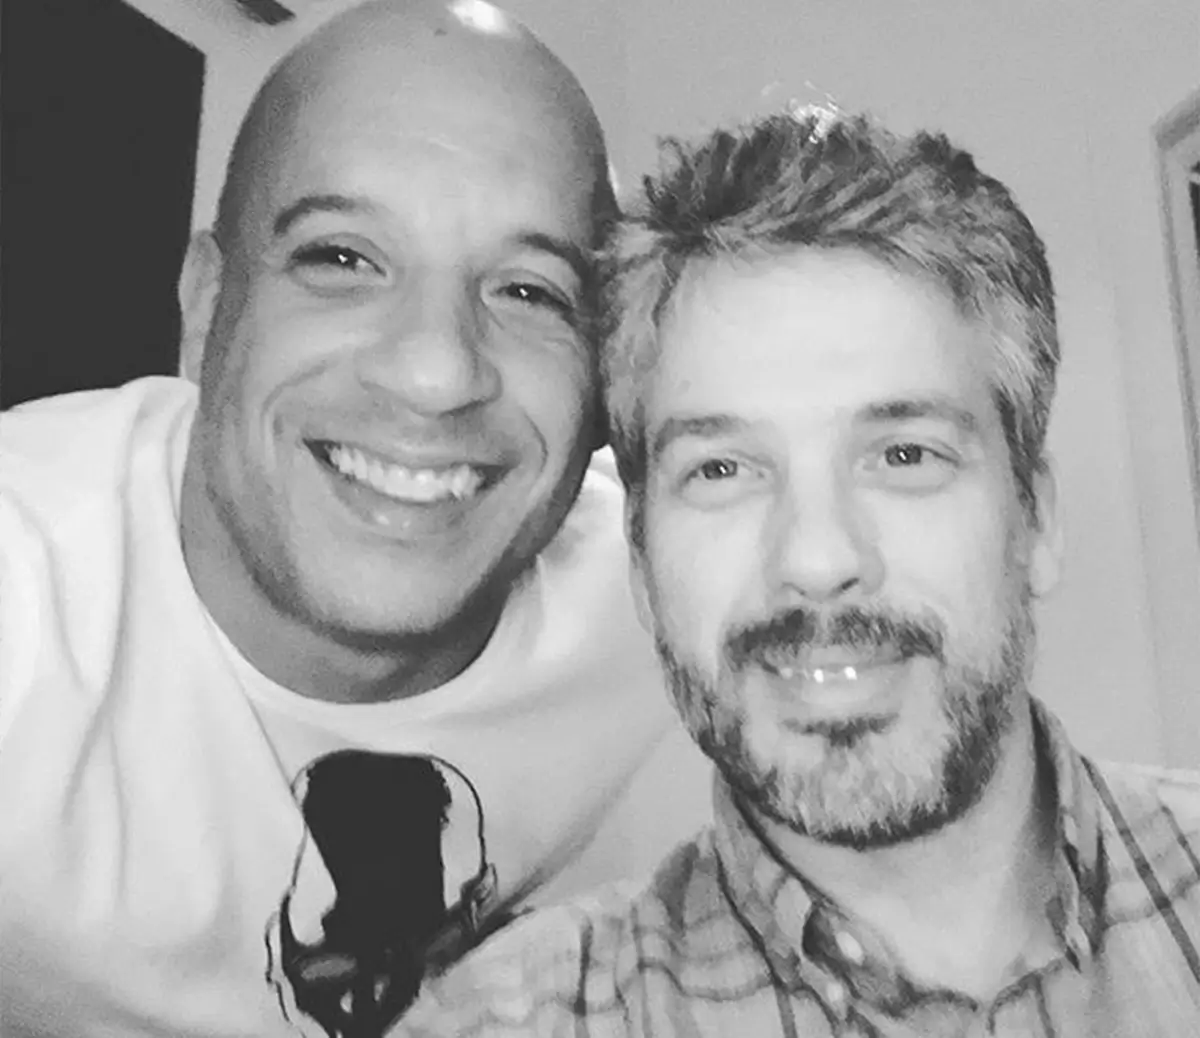 Vin Diesel and his fraternal twin brother